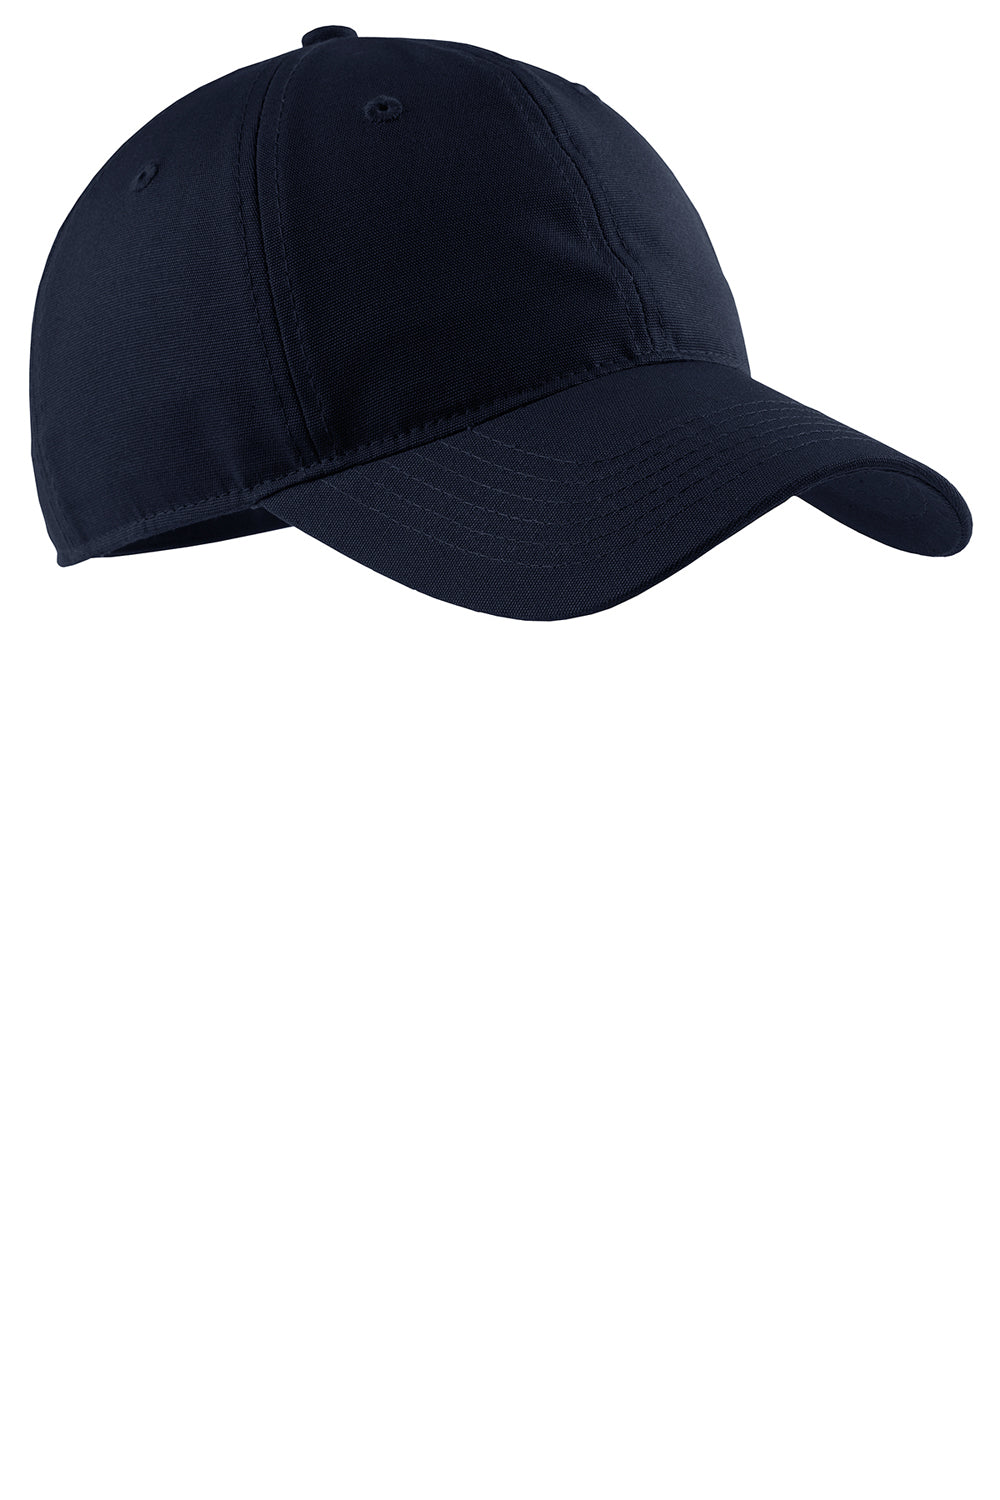 Port Authority CP96 Mens Adjustable Hat Navy Blue Front